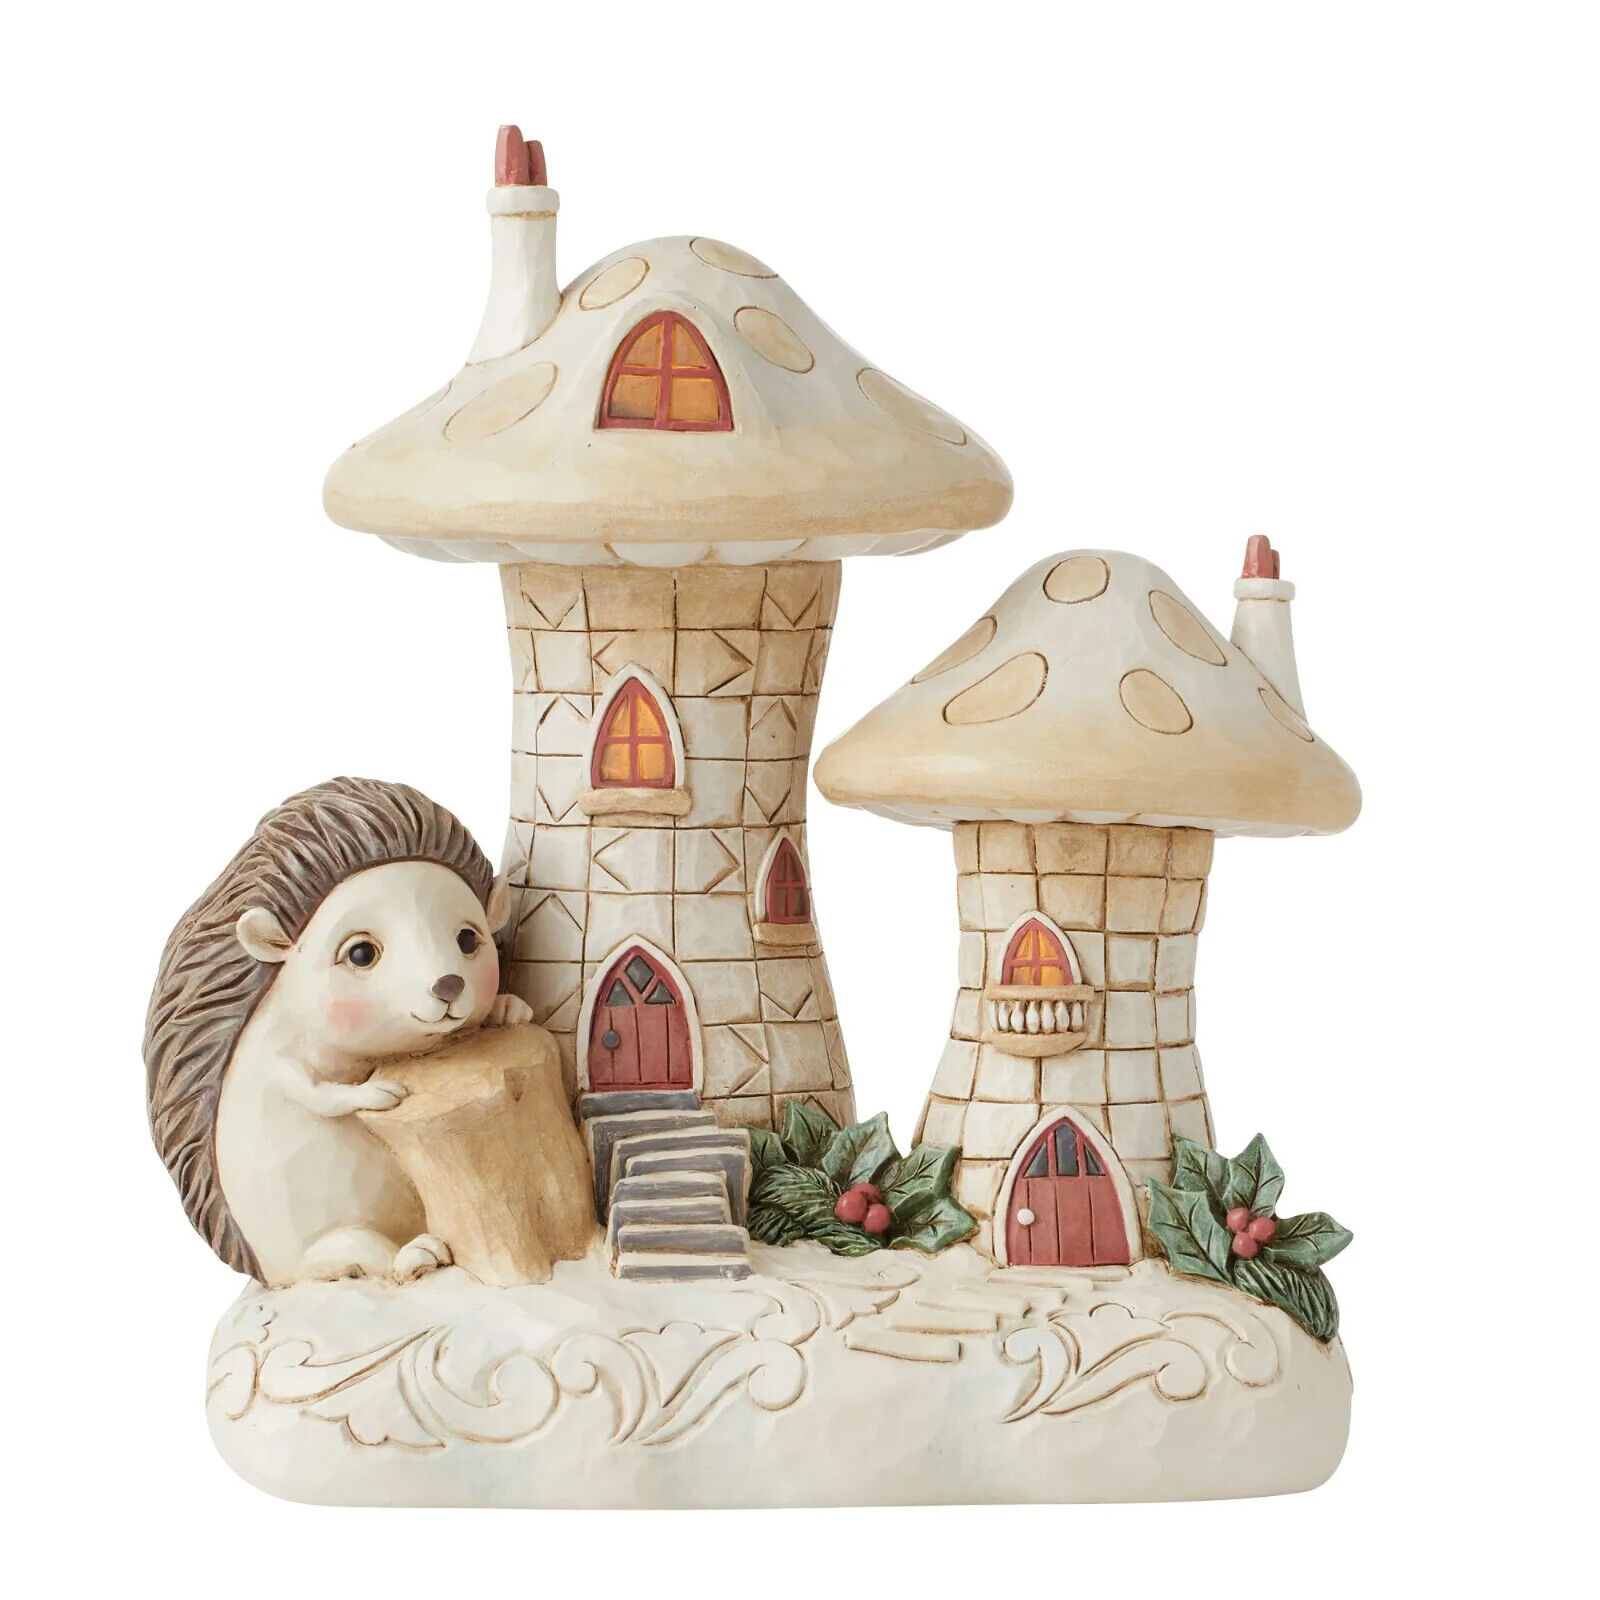 Jim Shore WOODLAND LIGHTED MUSHROOM HOUSE-HOLIDAY WISHES 6012684 NEW IN BOX